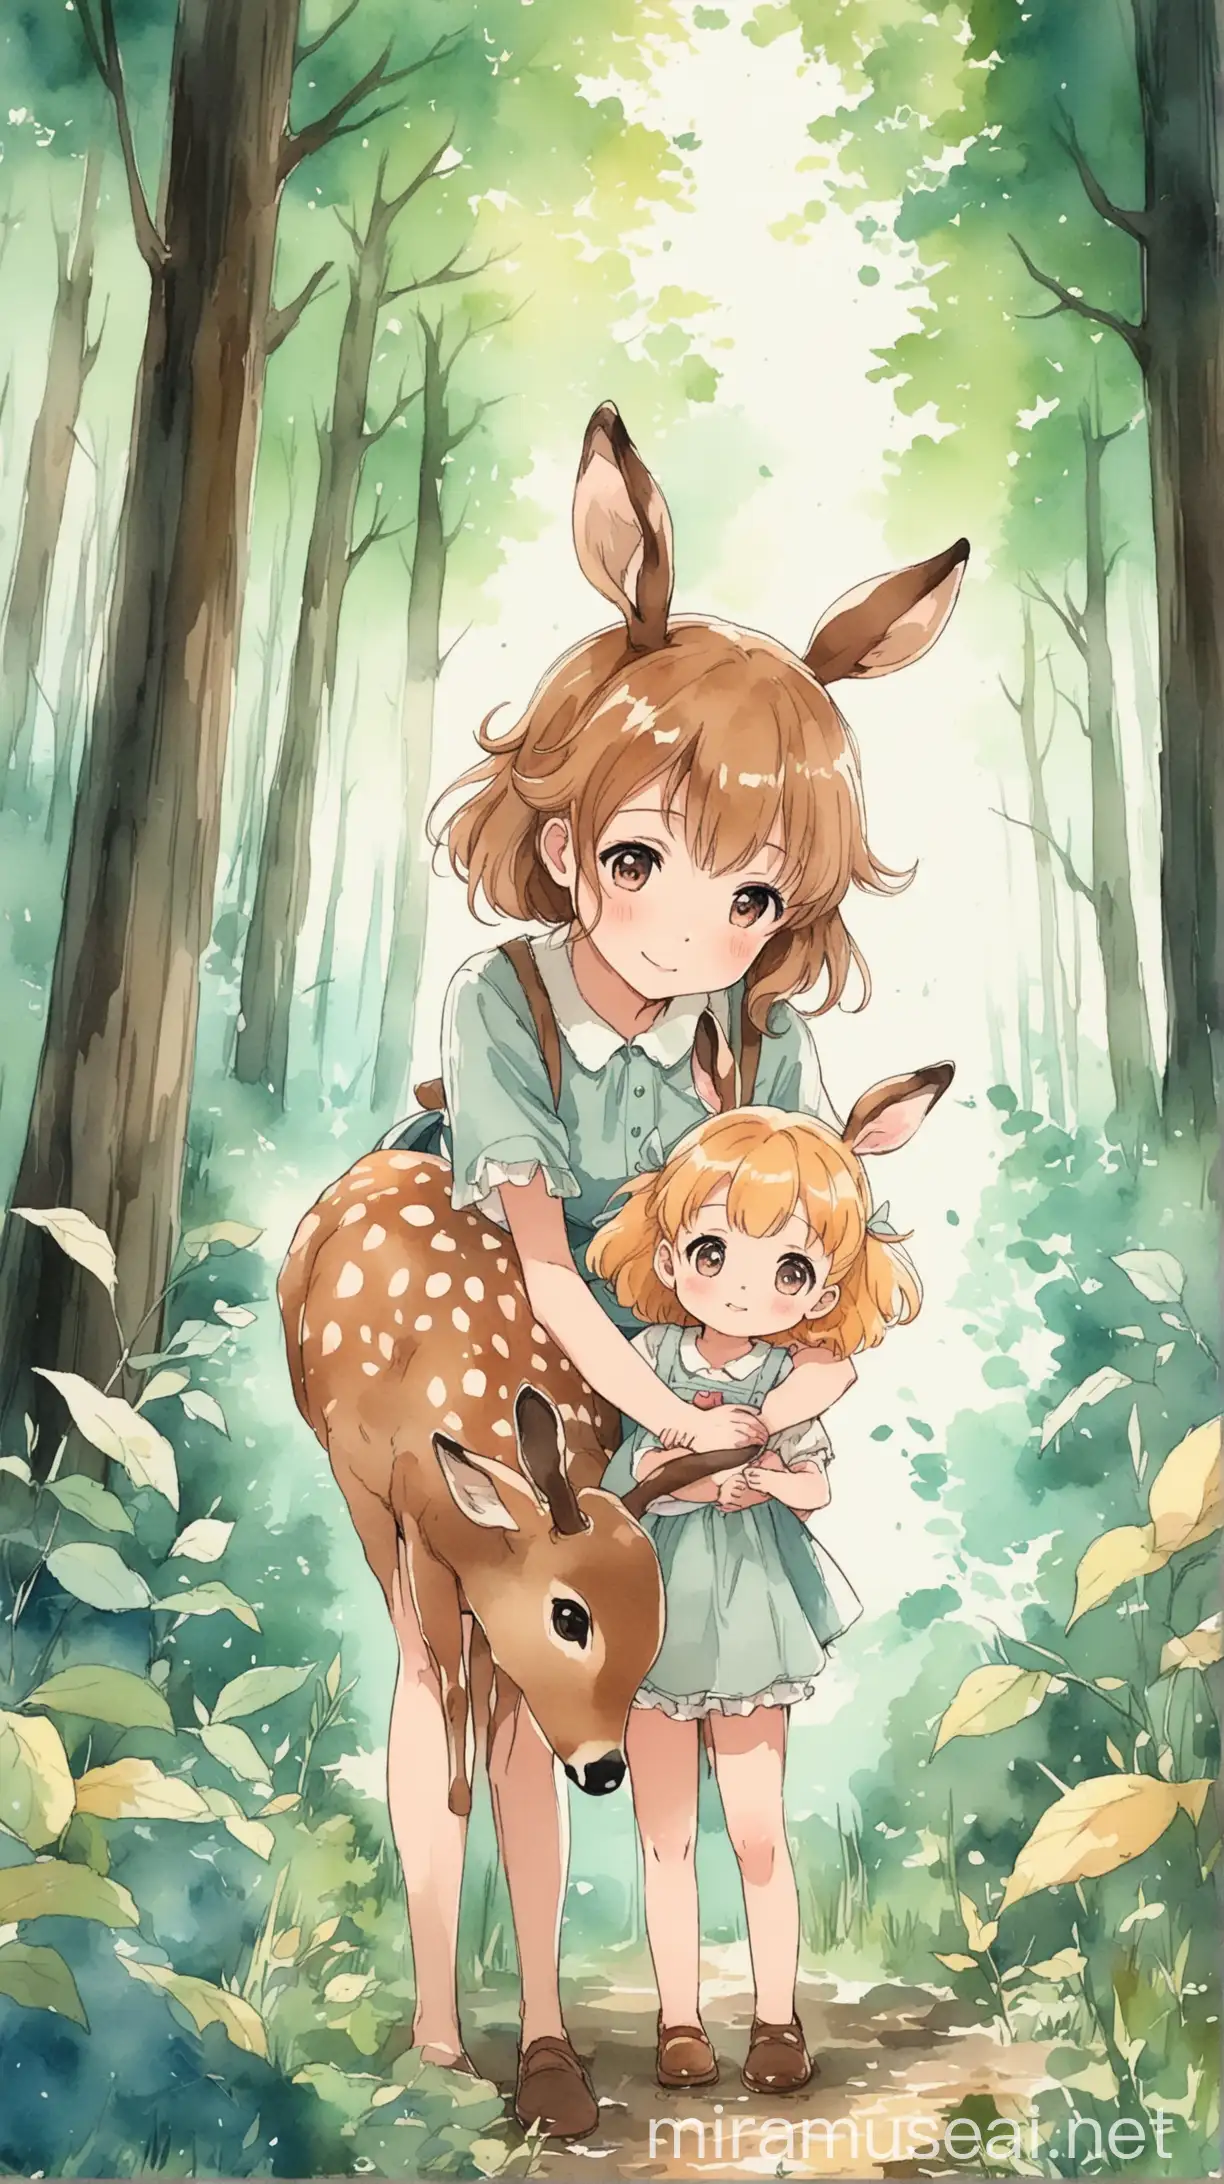 Whimsical Anime Watercolor Painting Adorable Deer and Fawn Amidst Enchanting Forest